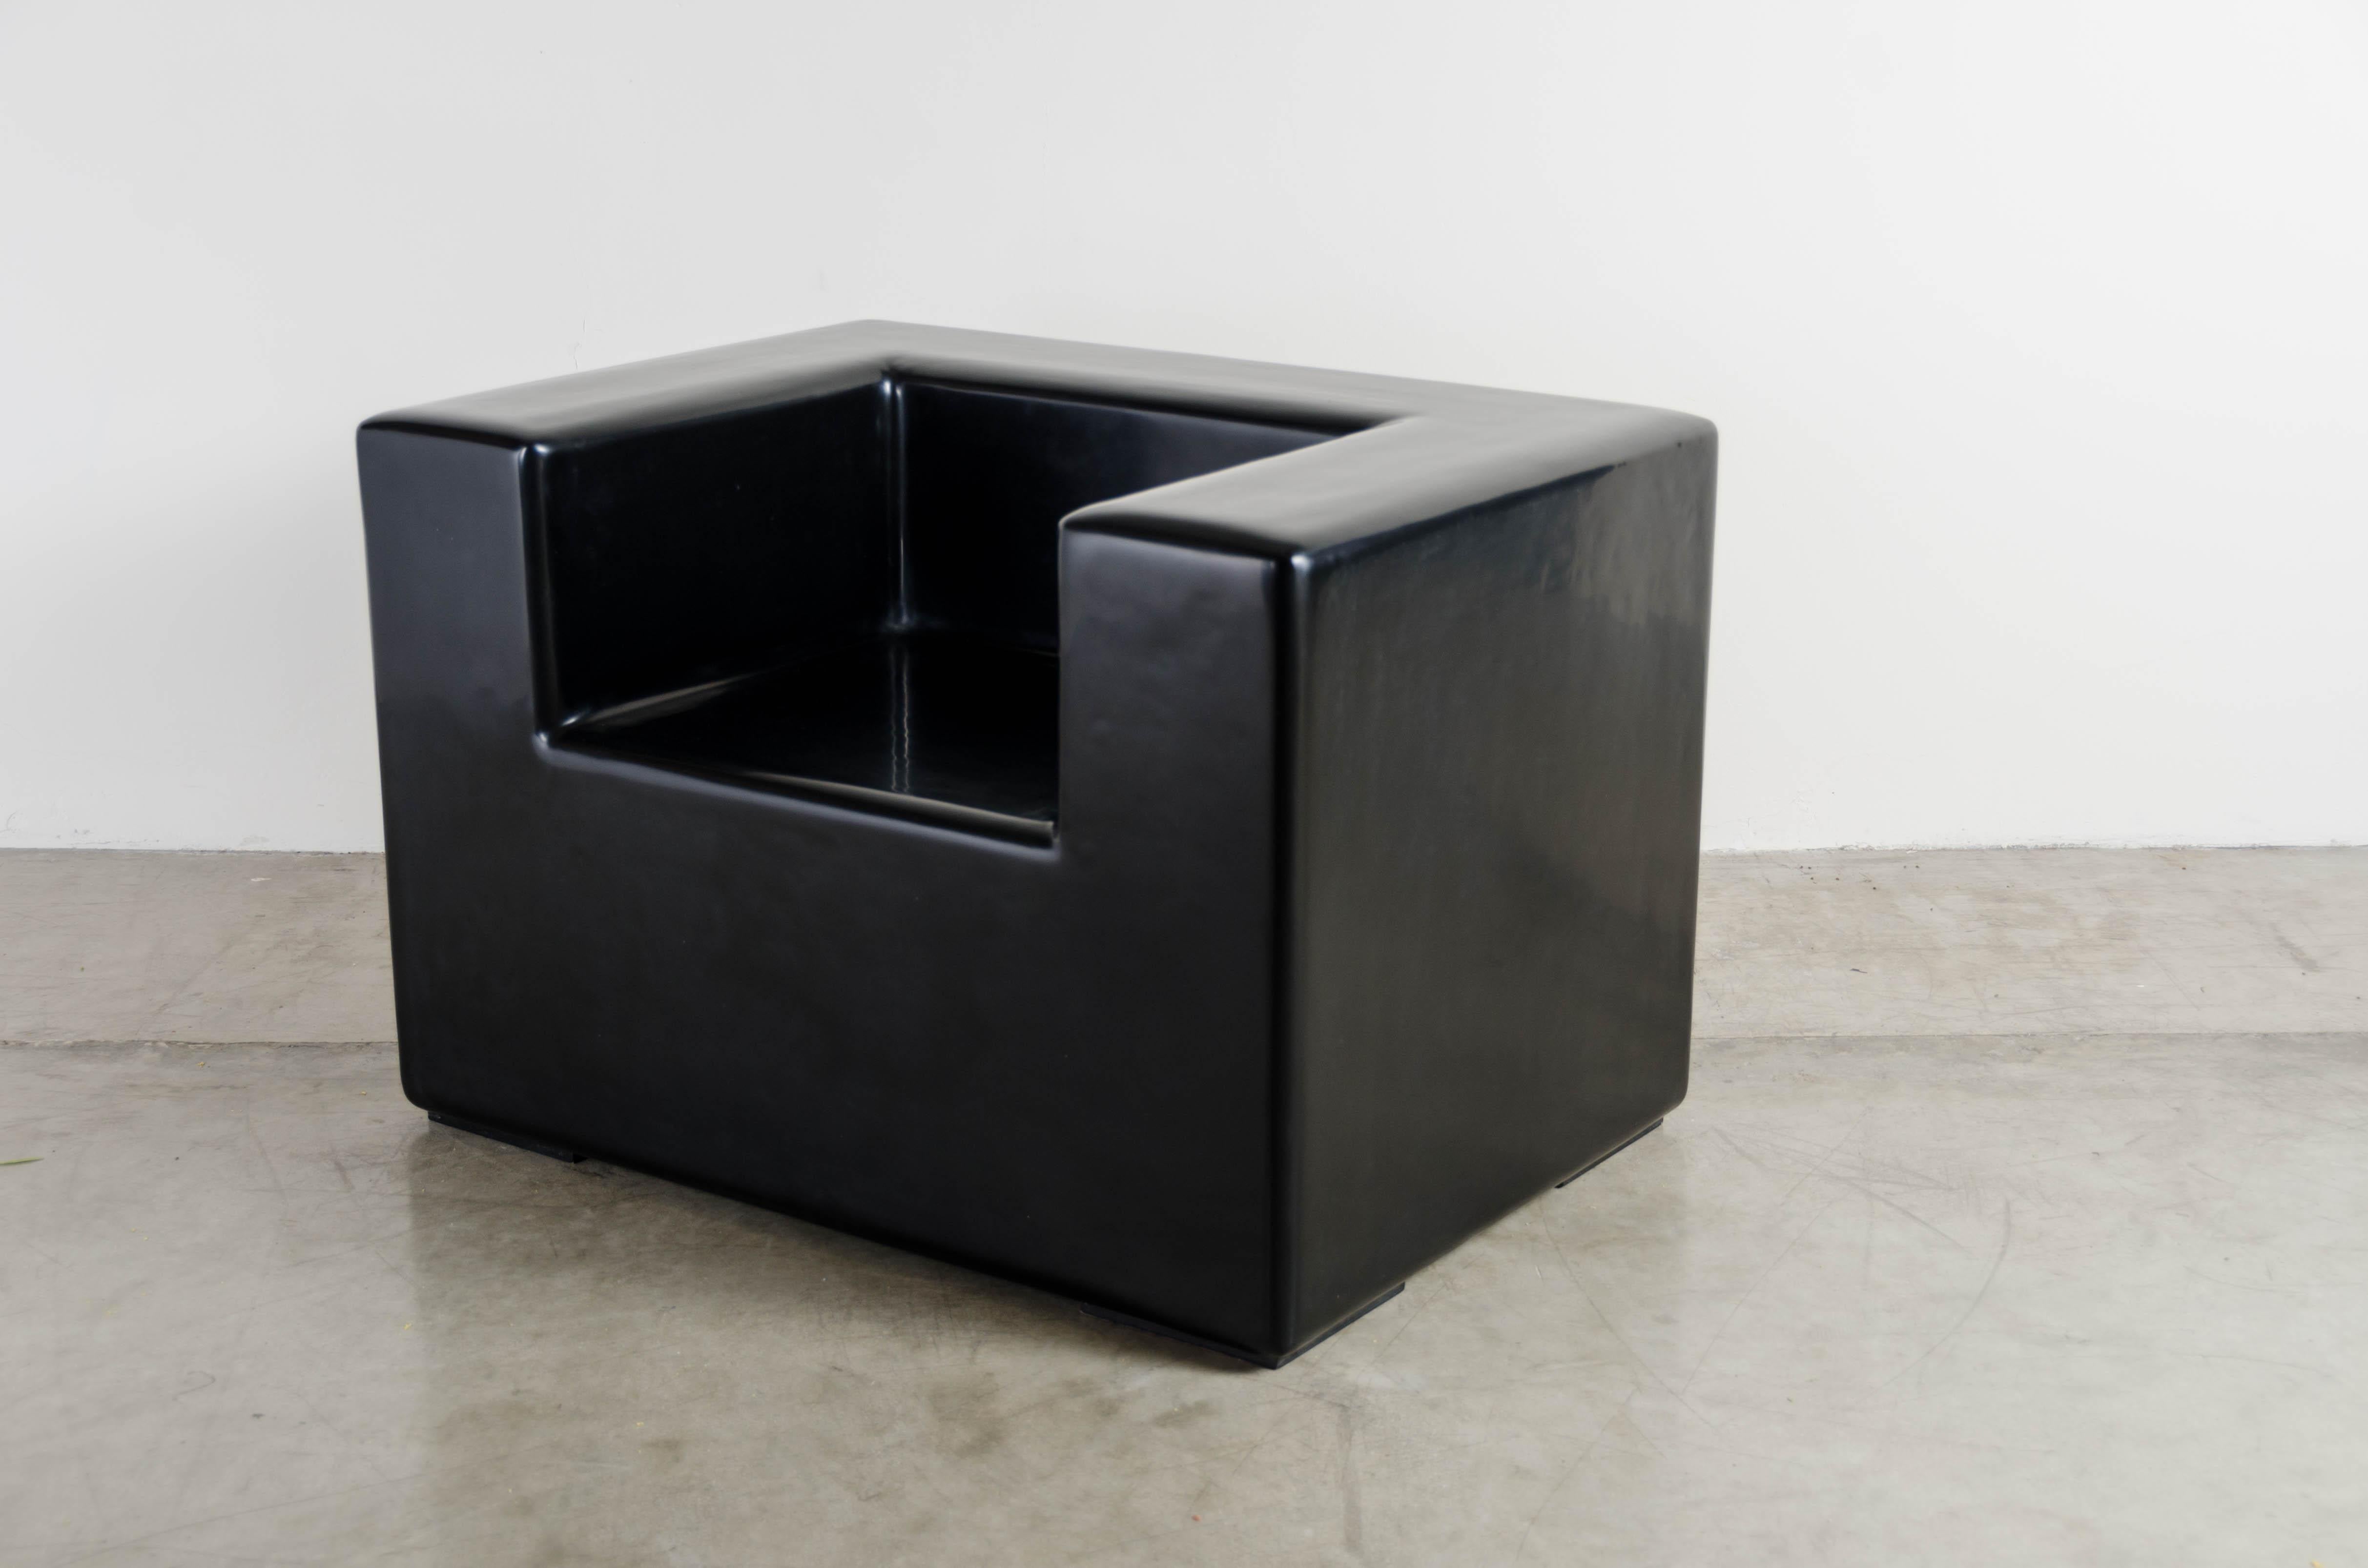 Arm Rest Chair, Black Lacquer by Robert Kuo, Handmade, Limited Edition In New Condition For Sale In Los Angeles, CA